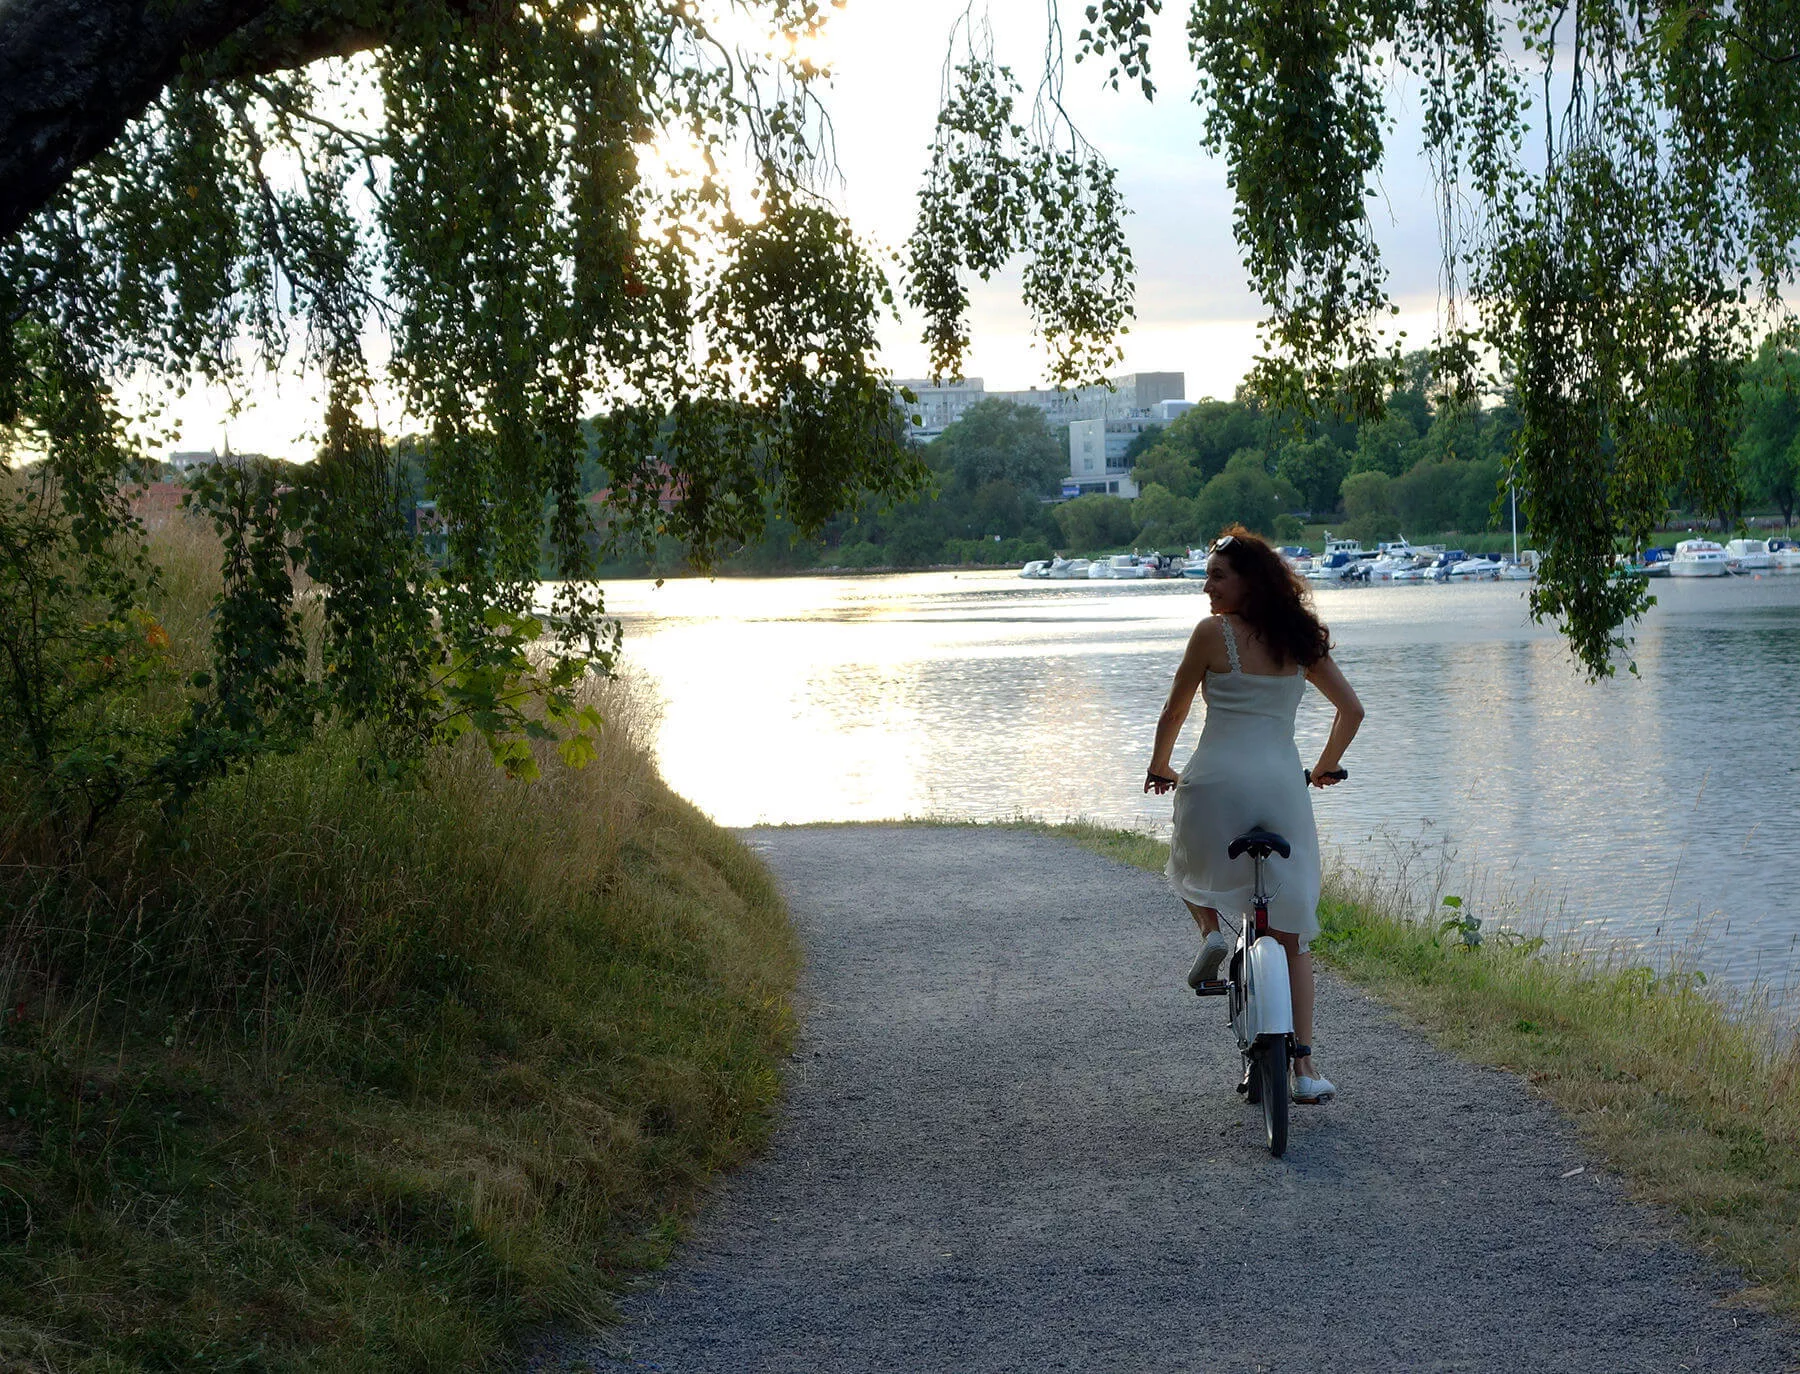 A bike ride through the island of Djurgården is a peaceful way to see a different side of Stockholm